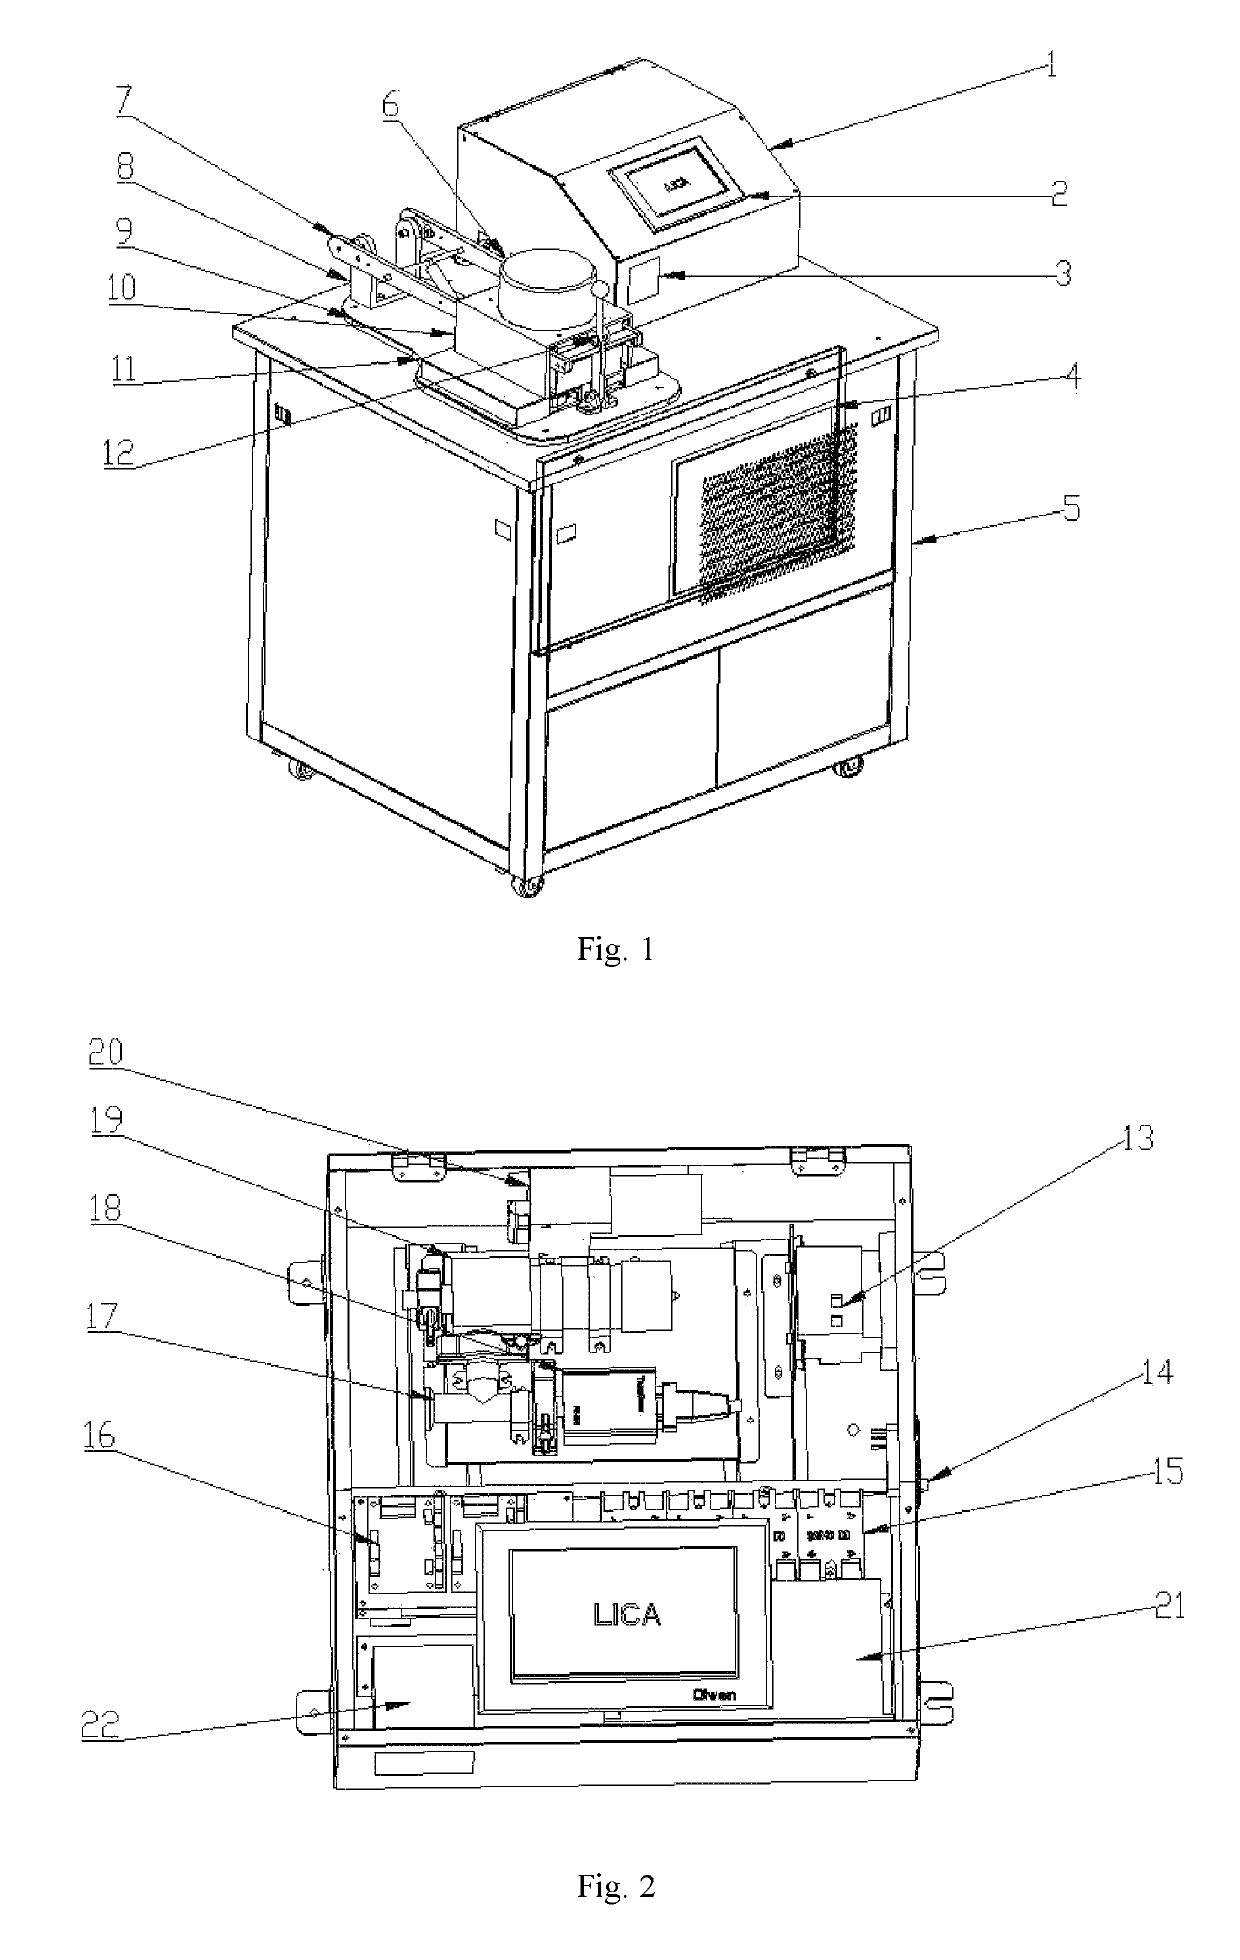 Apparatus for full-automatic, ultra-low pressure, fractionation-free and non-destructive extraction of water